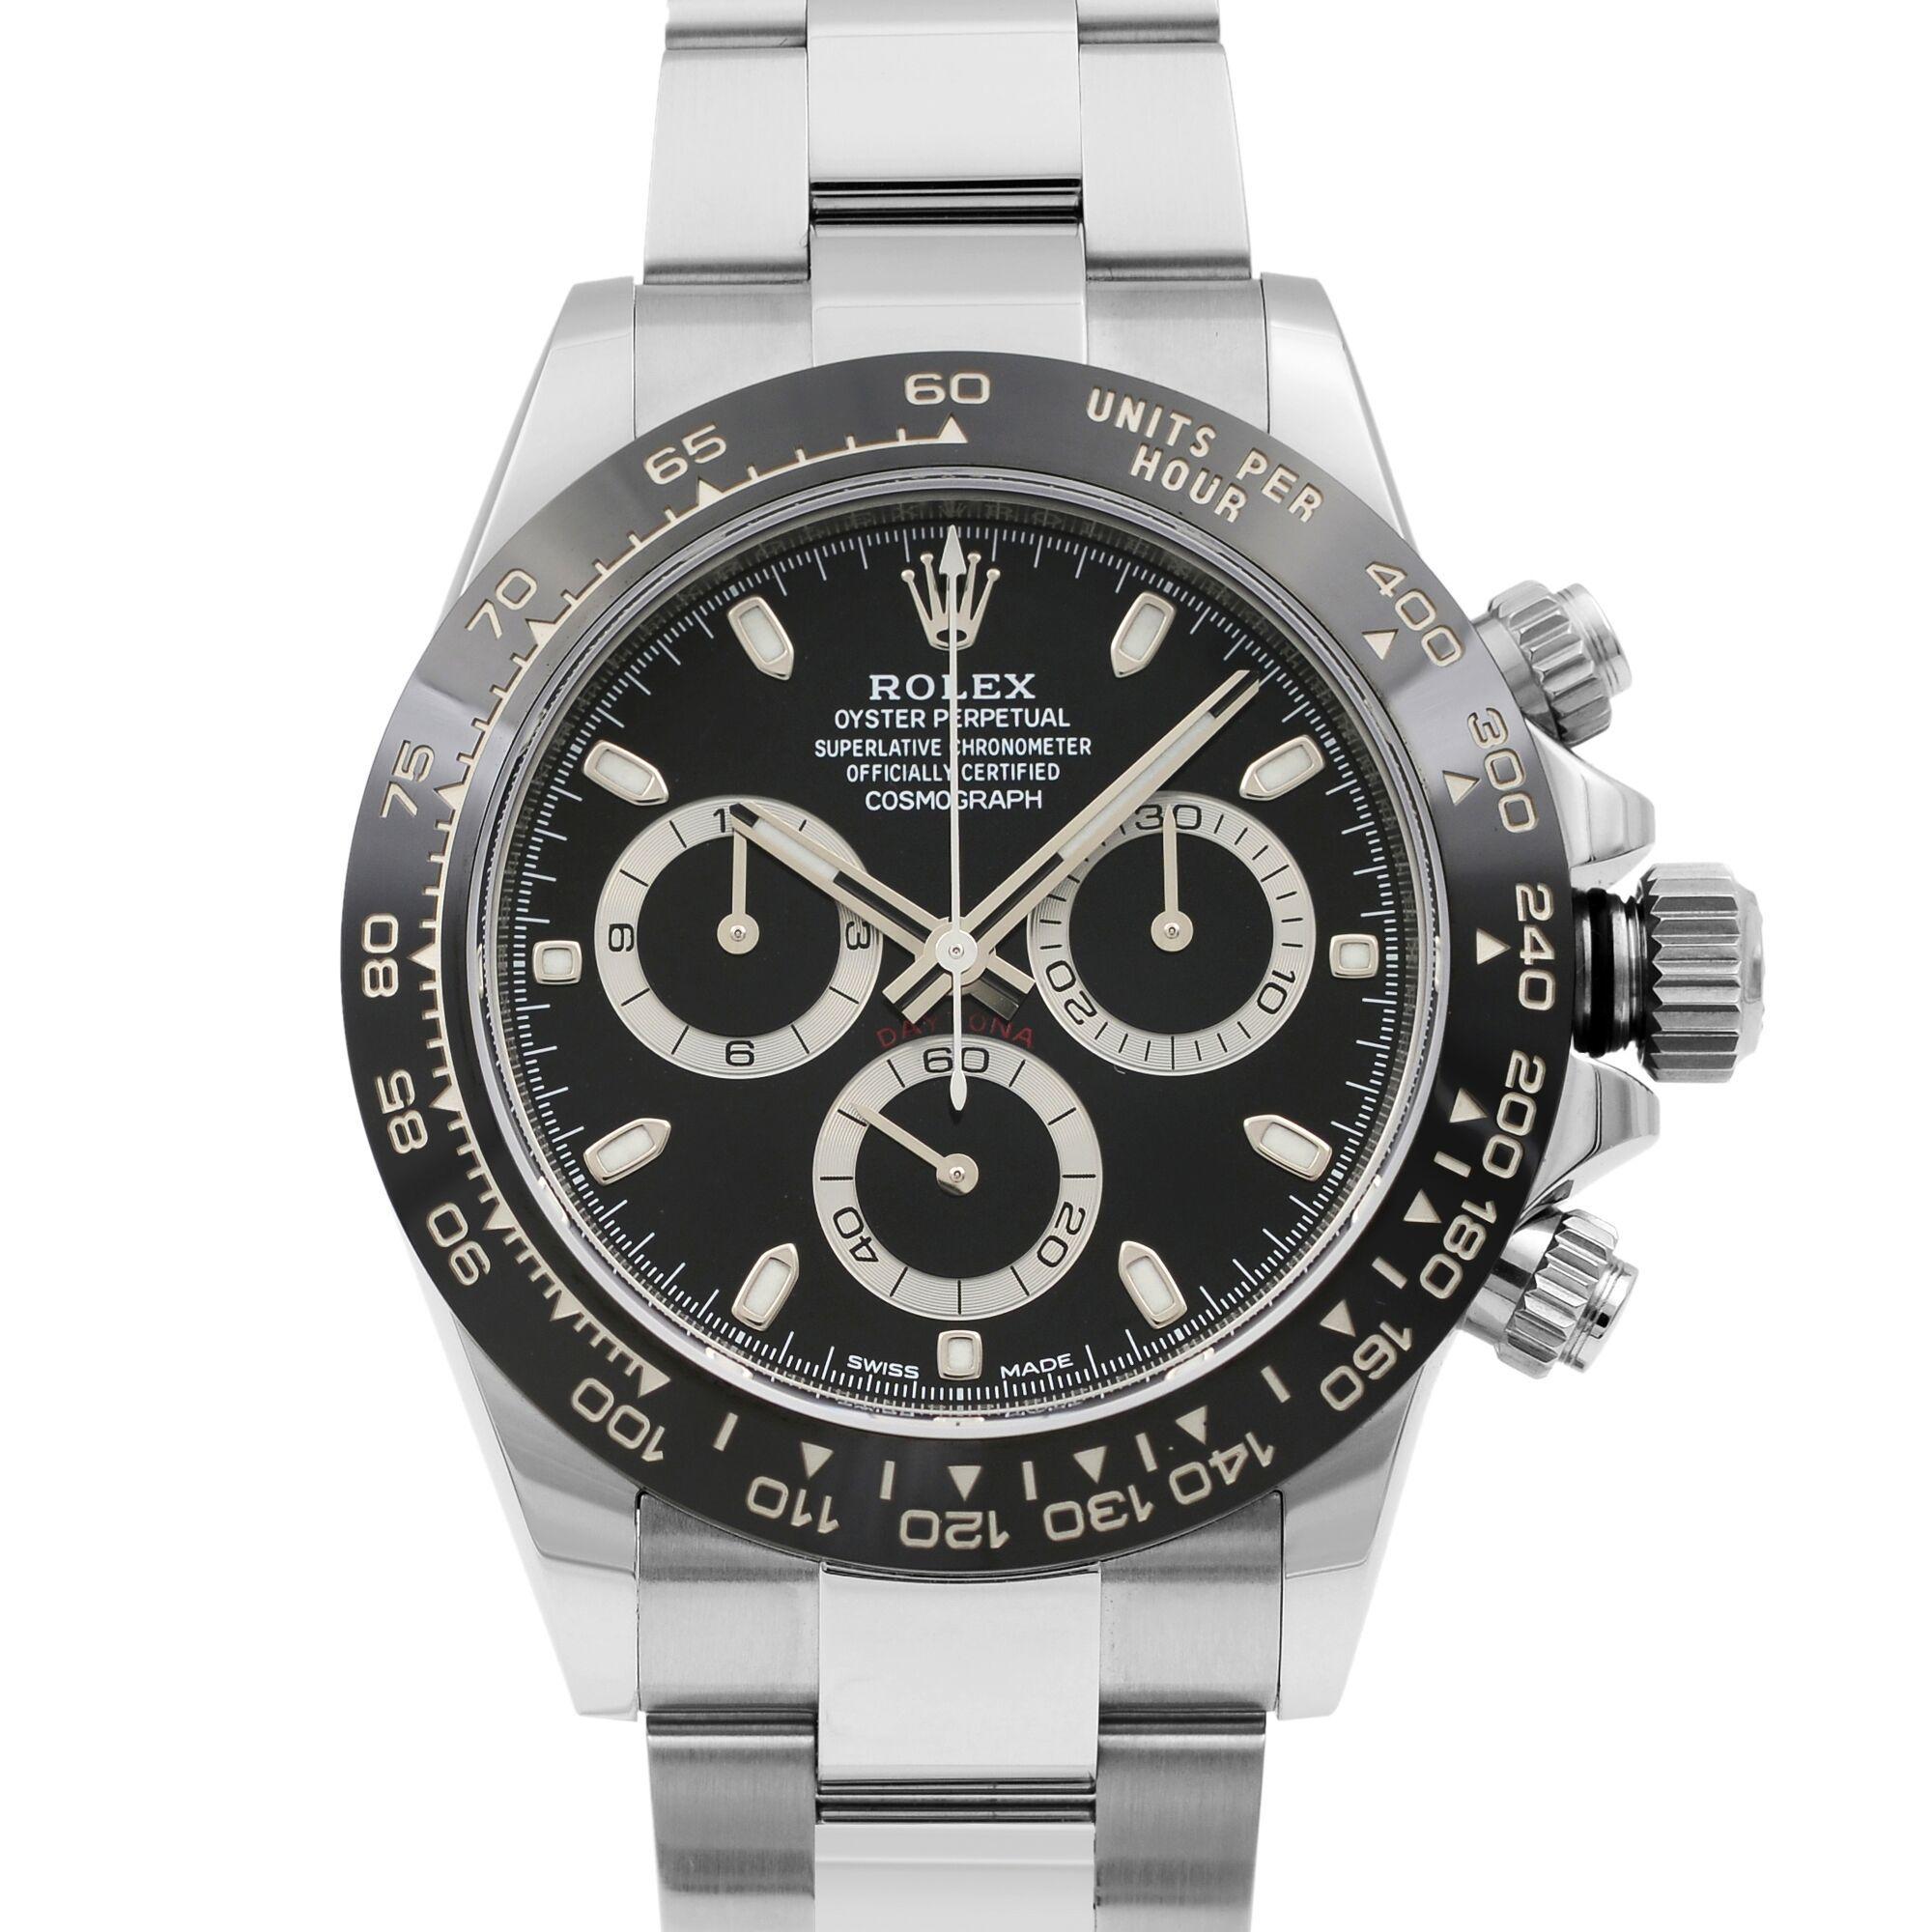 Unworn. 2022 Card. Box and papers. 

Brand: Rolex  Type: Wristwatch  Department: Men  Model Number: 116500LN  Country/Region of Manufacture: Switzerland  Style: Luxury  Model: Rolex Daytona 116500LN  Vintage: No  Movement: Mechanical (Automatic) 